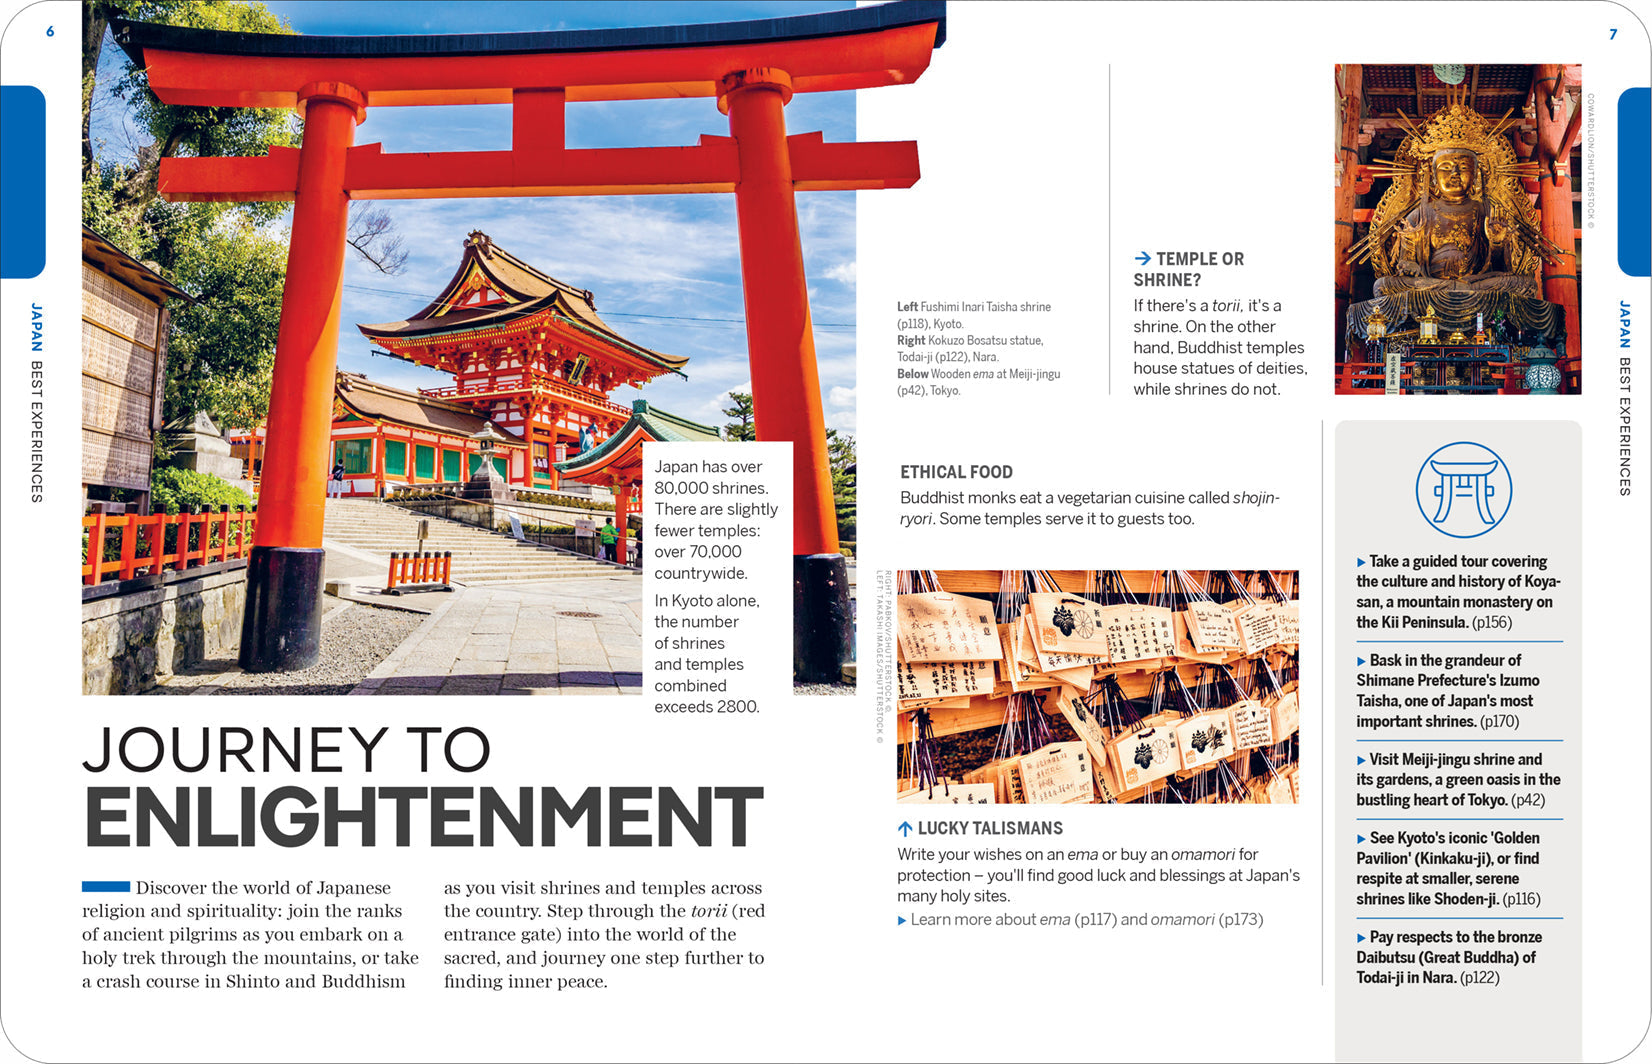 Experience Japan - Book